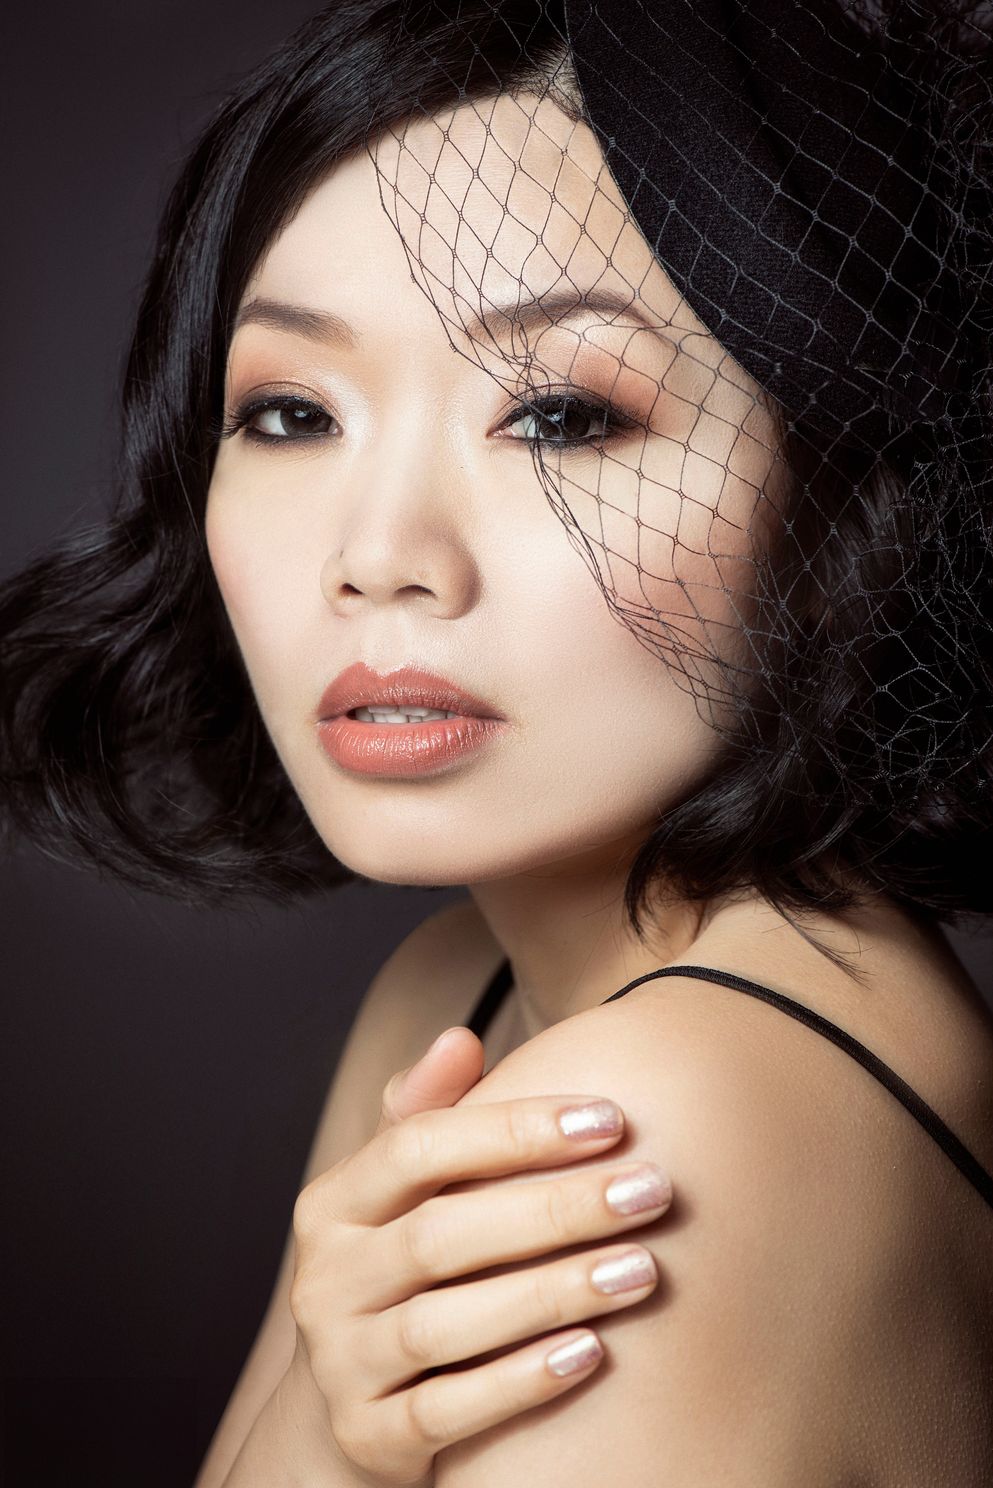 Close-up image of an elegant Asian female model with a net on her head